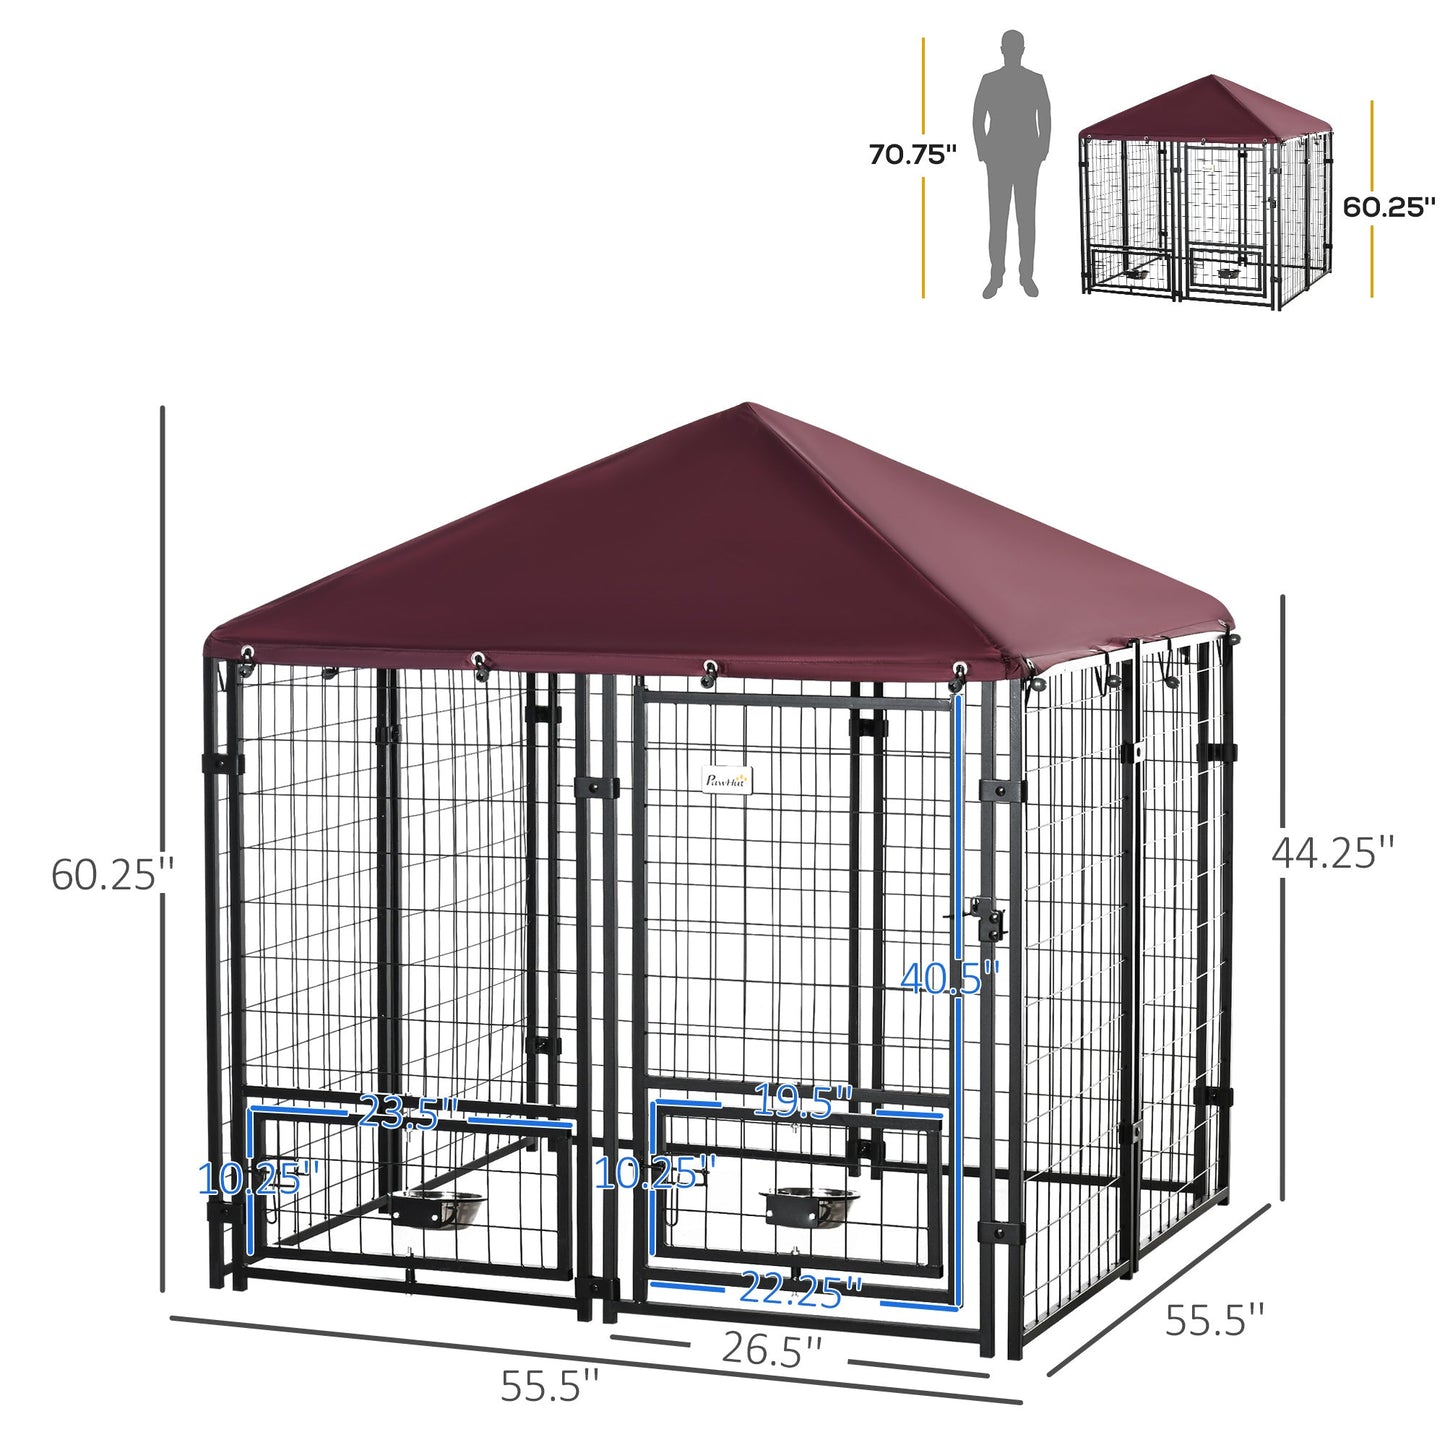 Pet Supplies-Indoor/Outdoor Metal Dog Crate, Dog House with Lock, Weather Resistant Canopy and 2 Bowl Holders and Bowls, 4.6' x 4.6' x 5', Black / Red - Outdoor Style Company